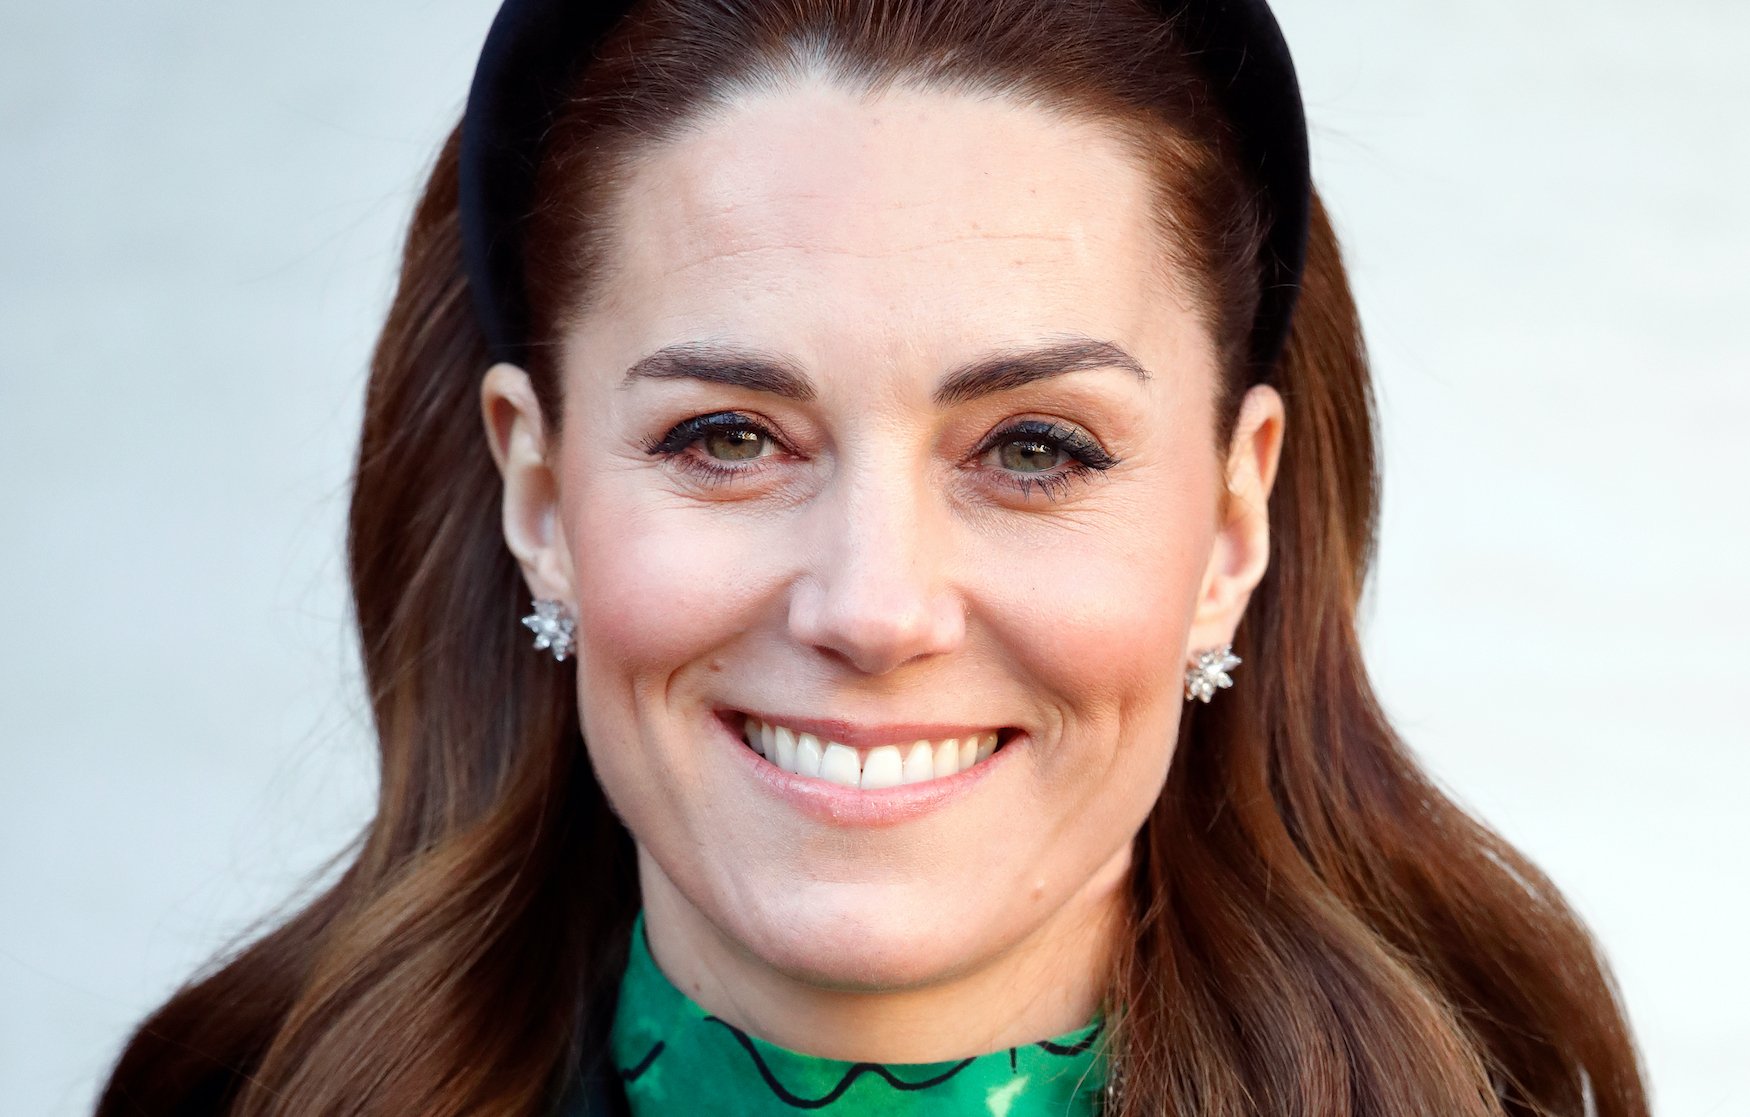 Kate Middleton smiles during a visit to Ireland in March 2020